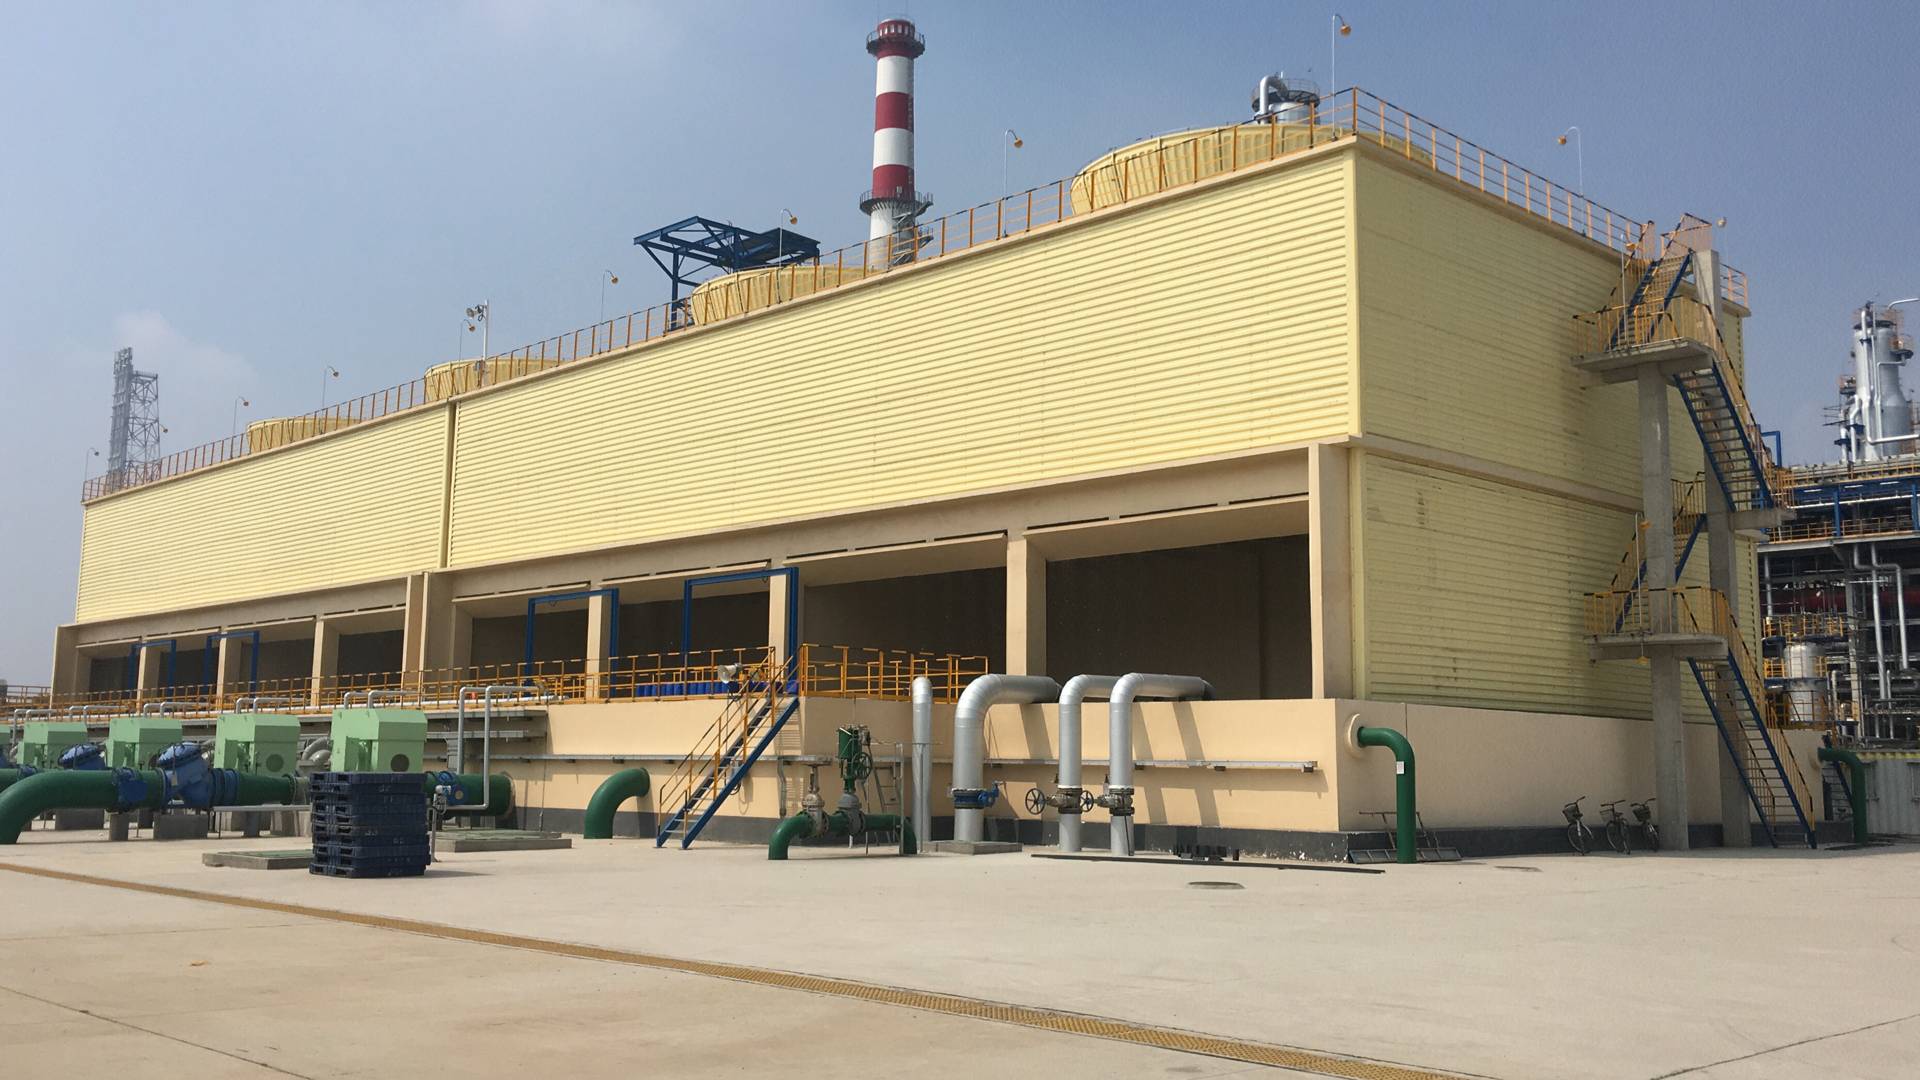 CNPC China Cooling Tower Ipdate and Renew Job